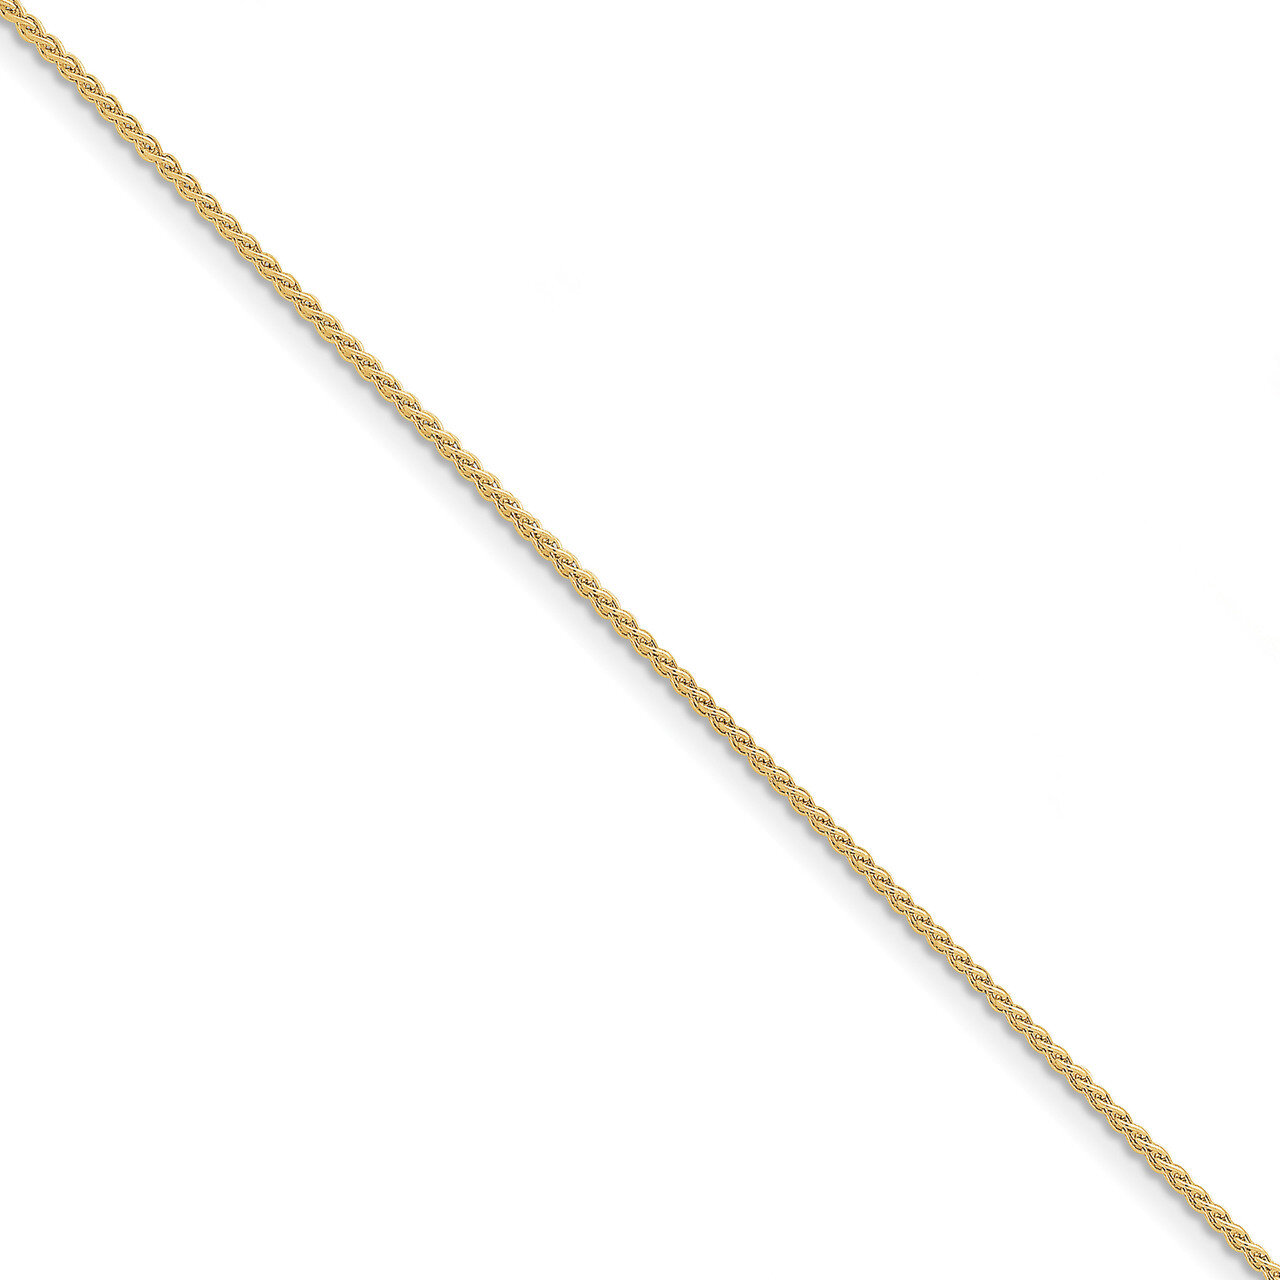 7 Inch 1.65mm Solid Polished Spiga Chain 10k Gold 10SPG040-7